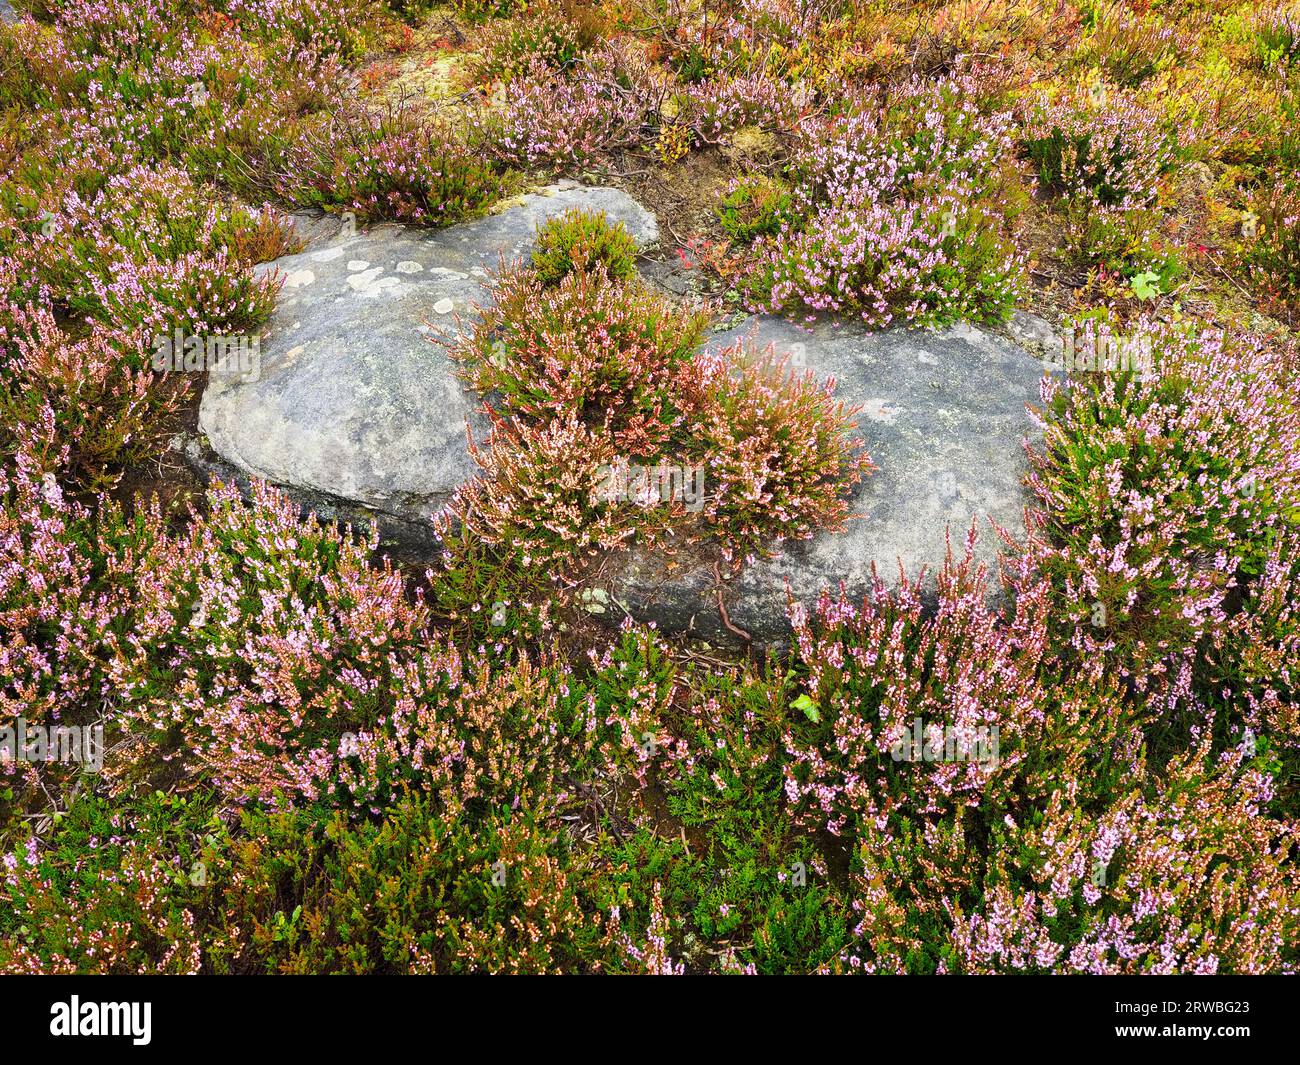 A gritstone boulder surrounded by heather in flower on moorland above Guise Cliff near Pateley Bridge Nidderdale North Yorkshire England Stock Photo